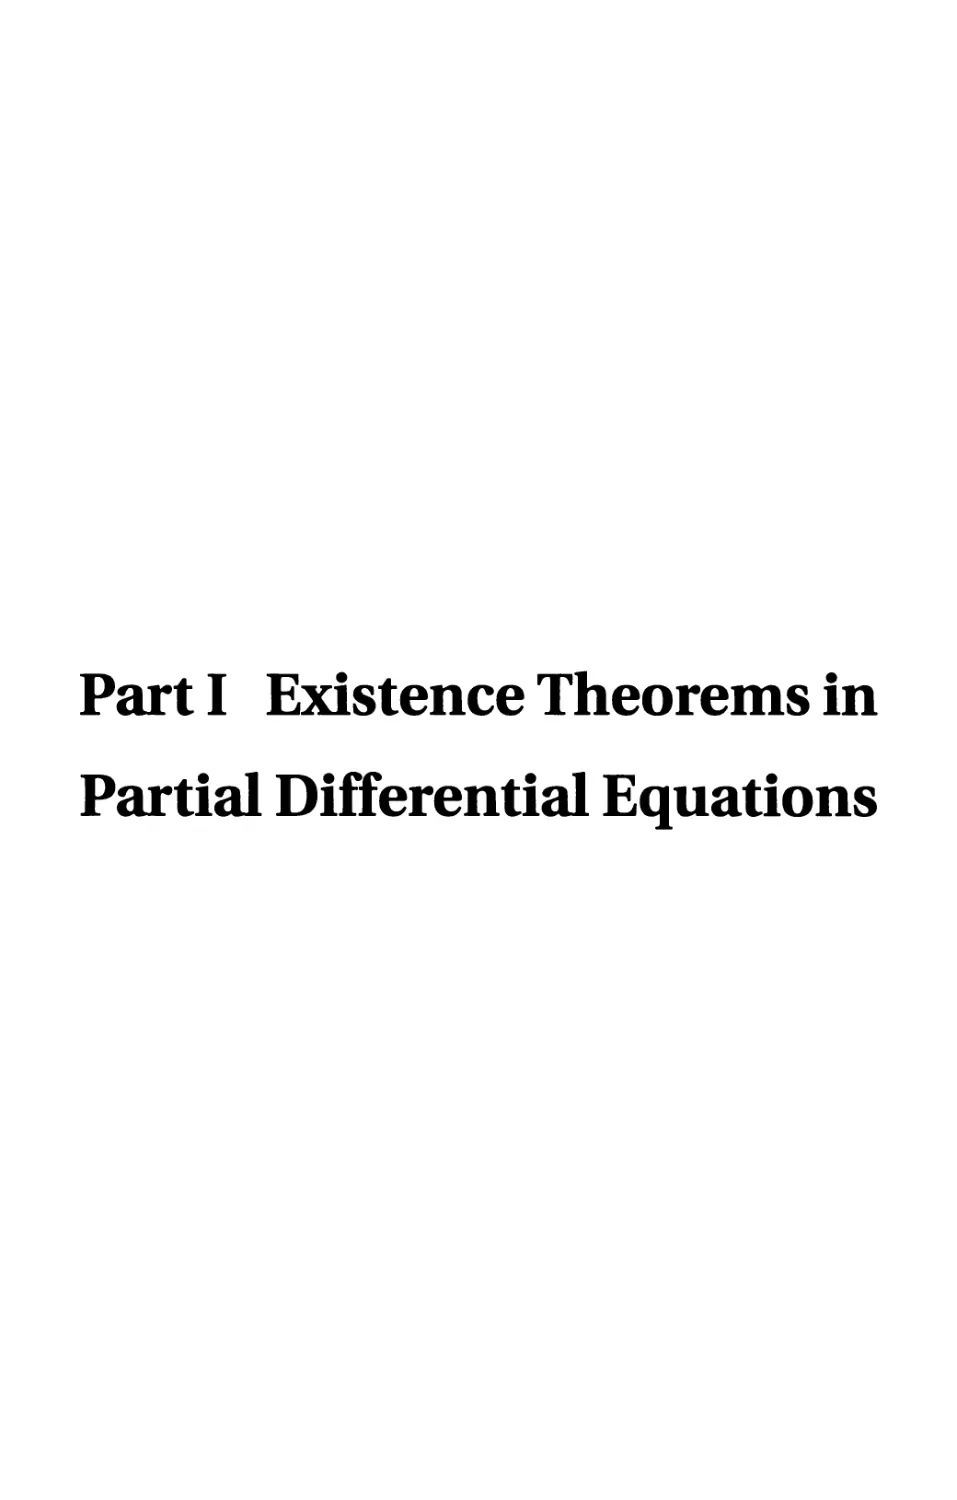 Part I. Existence Theorems in Partial Differential Equations